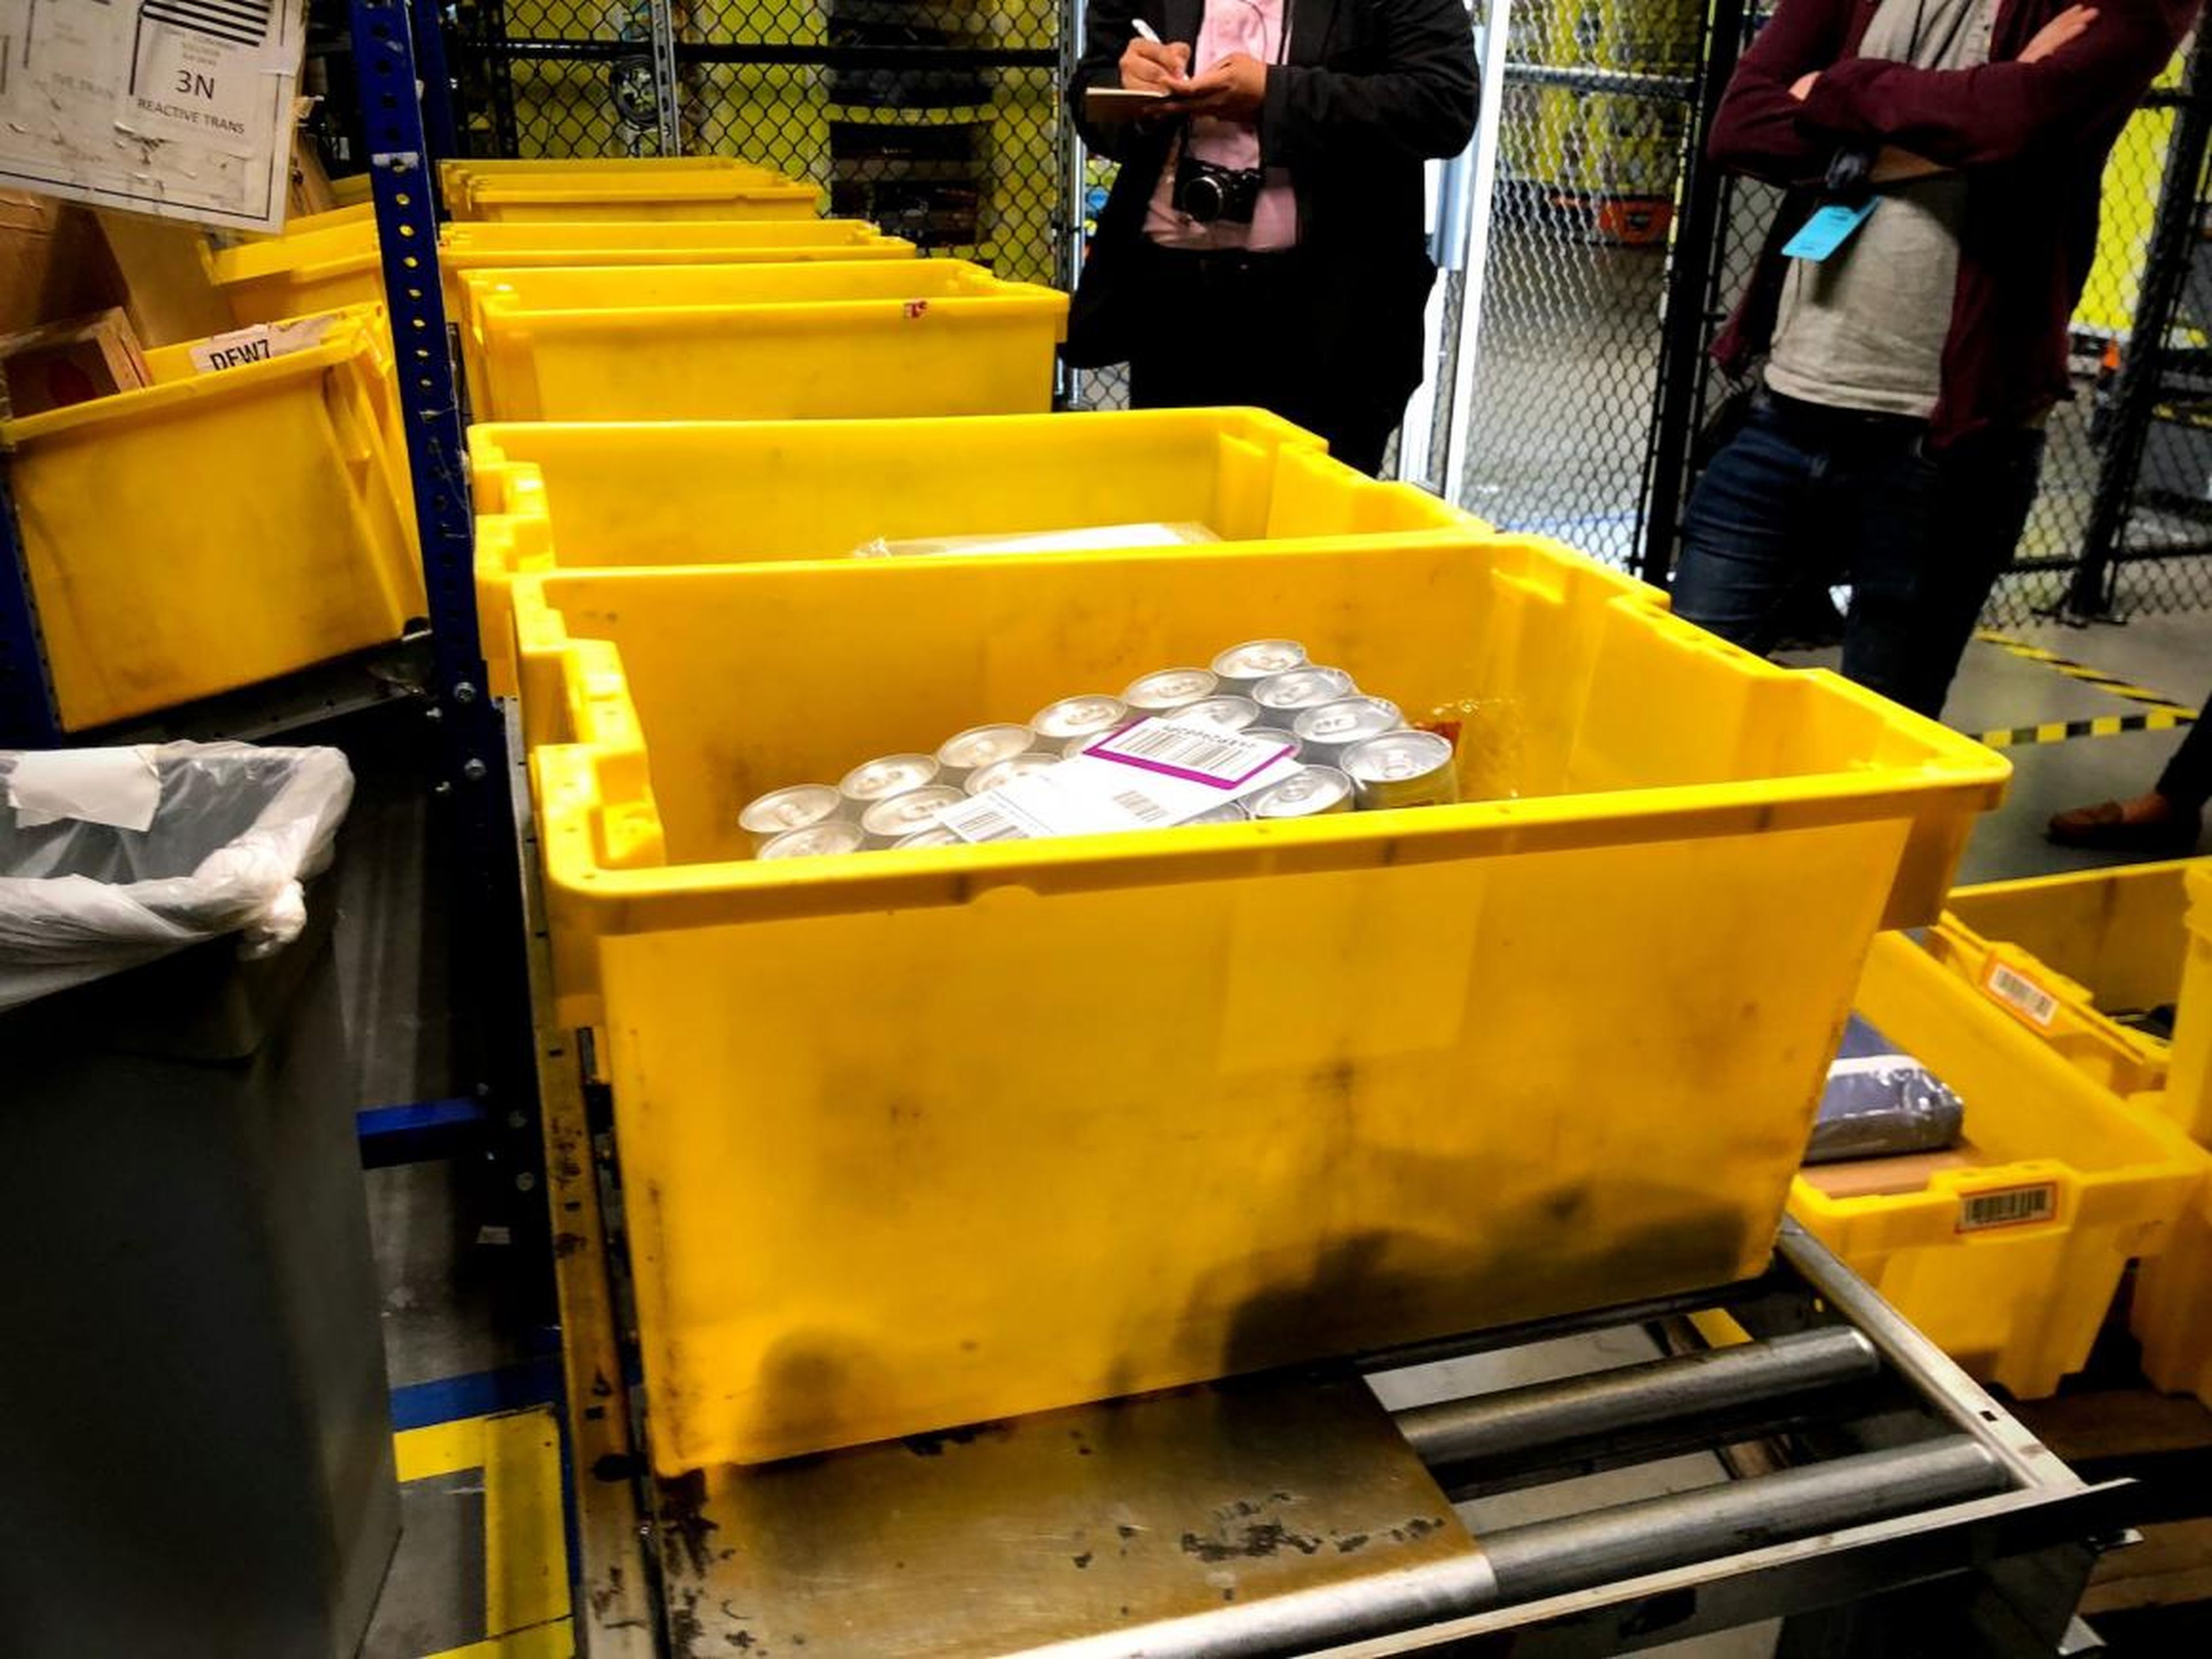 The fulfillment center relies heavily on these yellow bins, which I saw everywhere throughout my tour. Each has a barcode, and items that arrive at the fulfillment center are sorted into them using a process Amazon calls "random